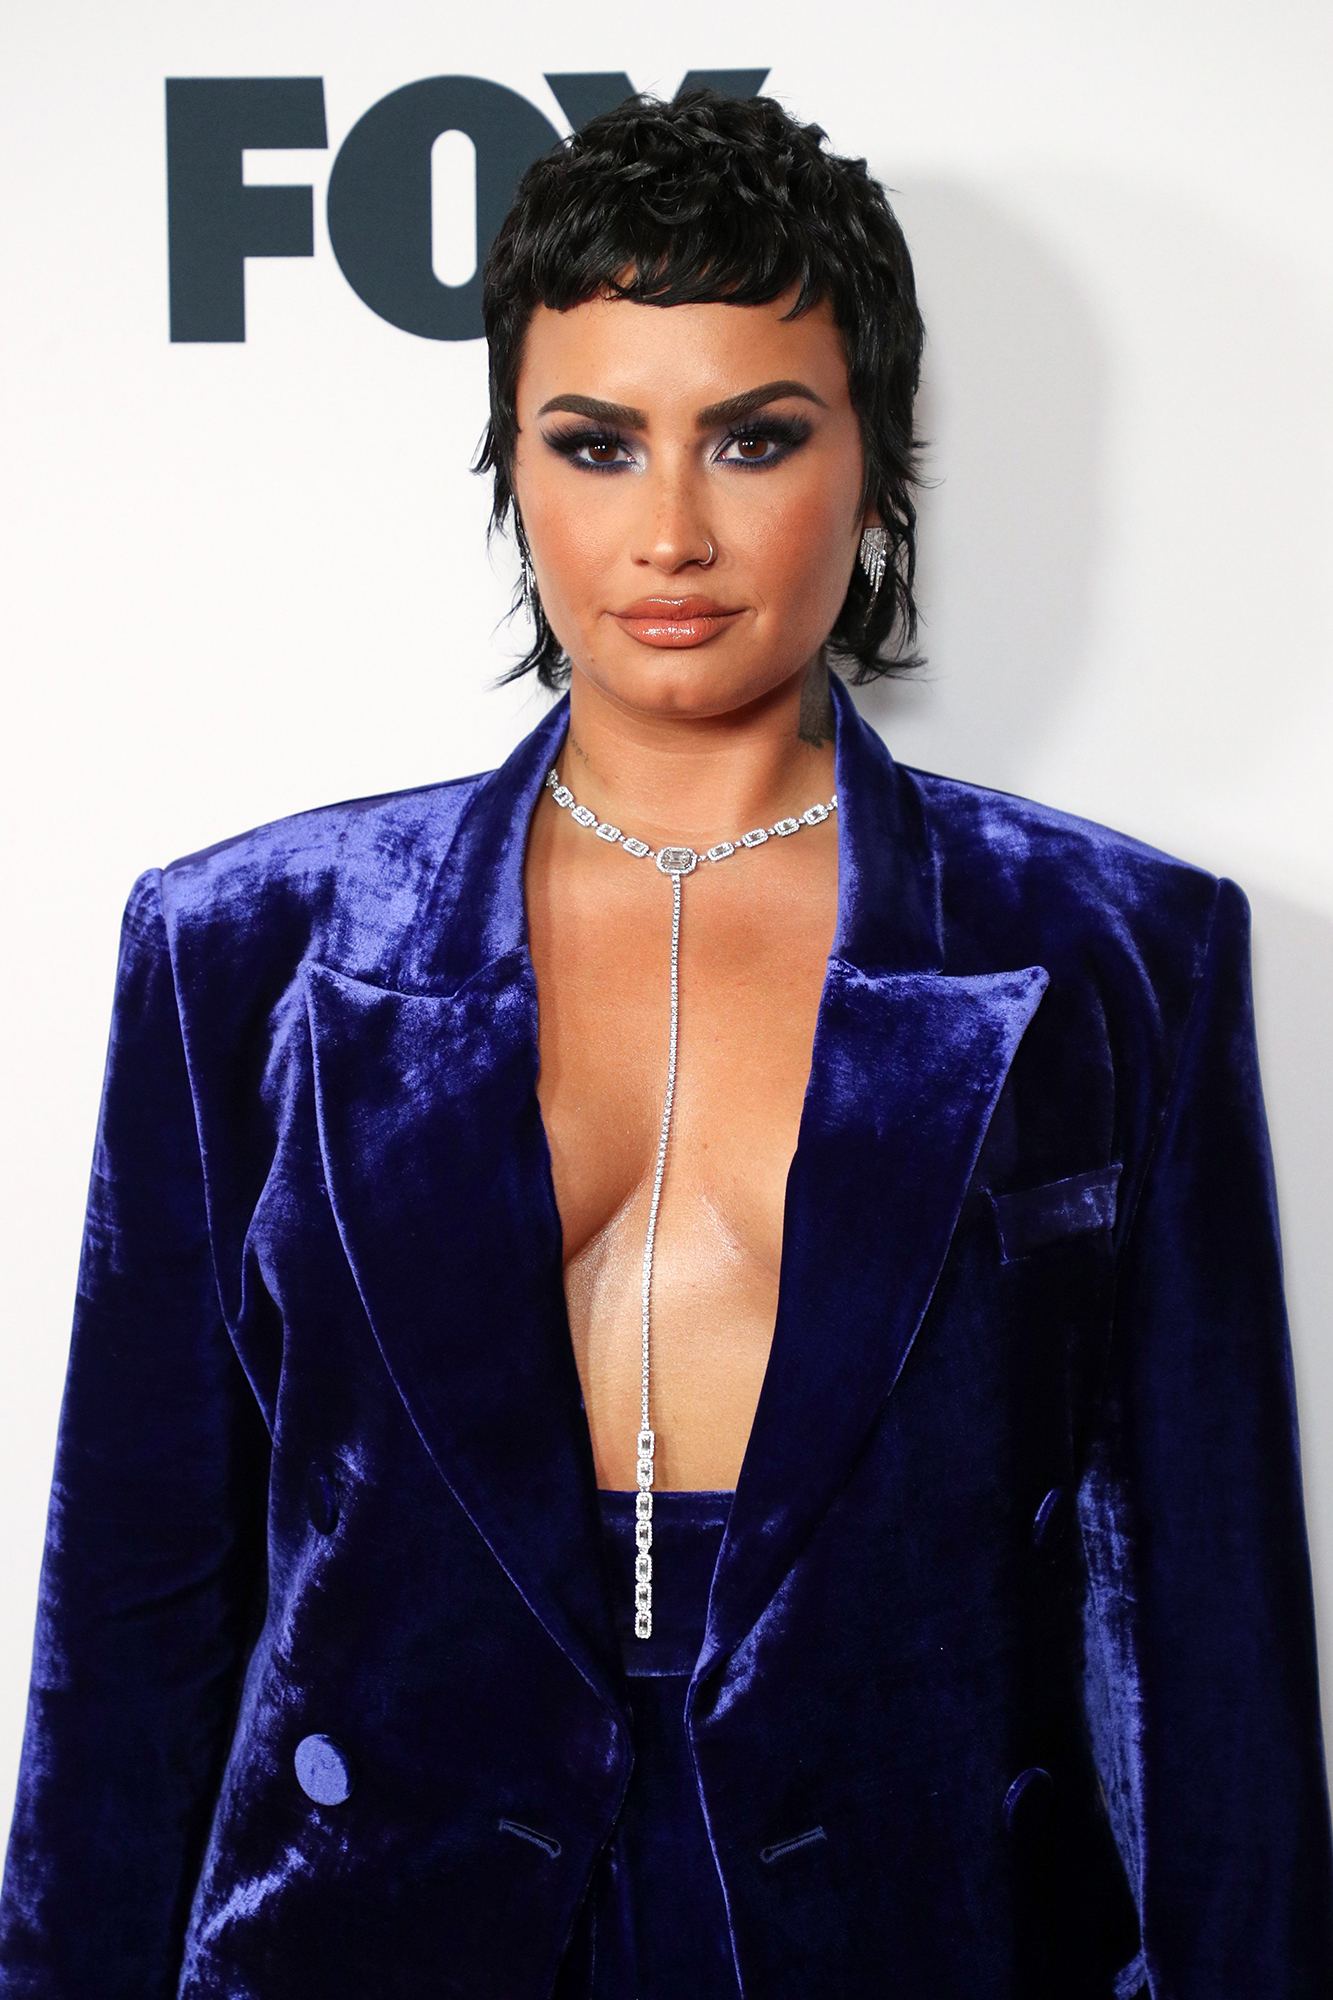 Demi Lovato Cancels Rest of Tour in Wake of Rehab